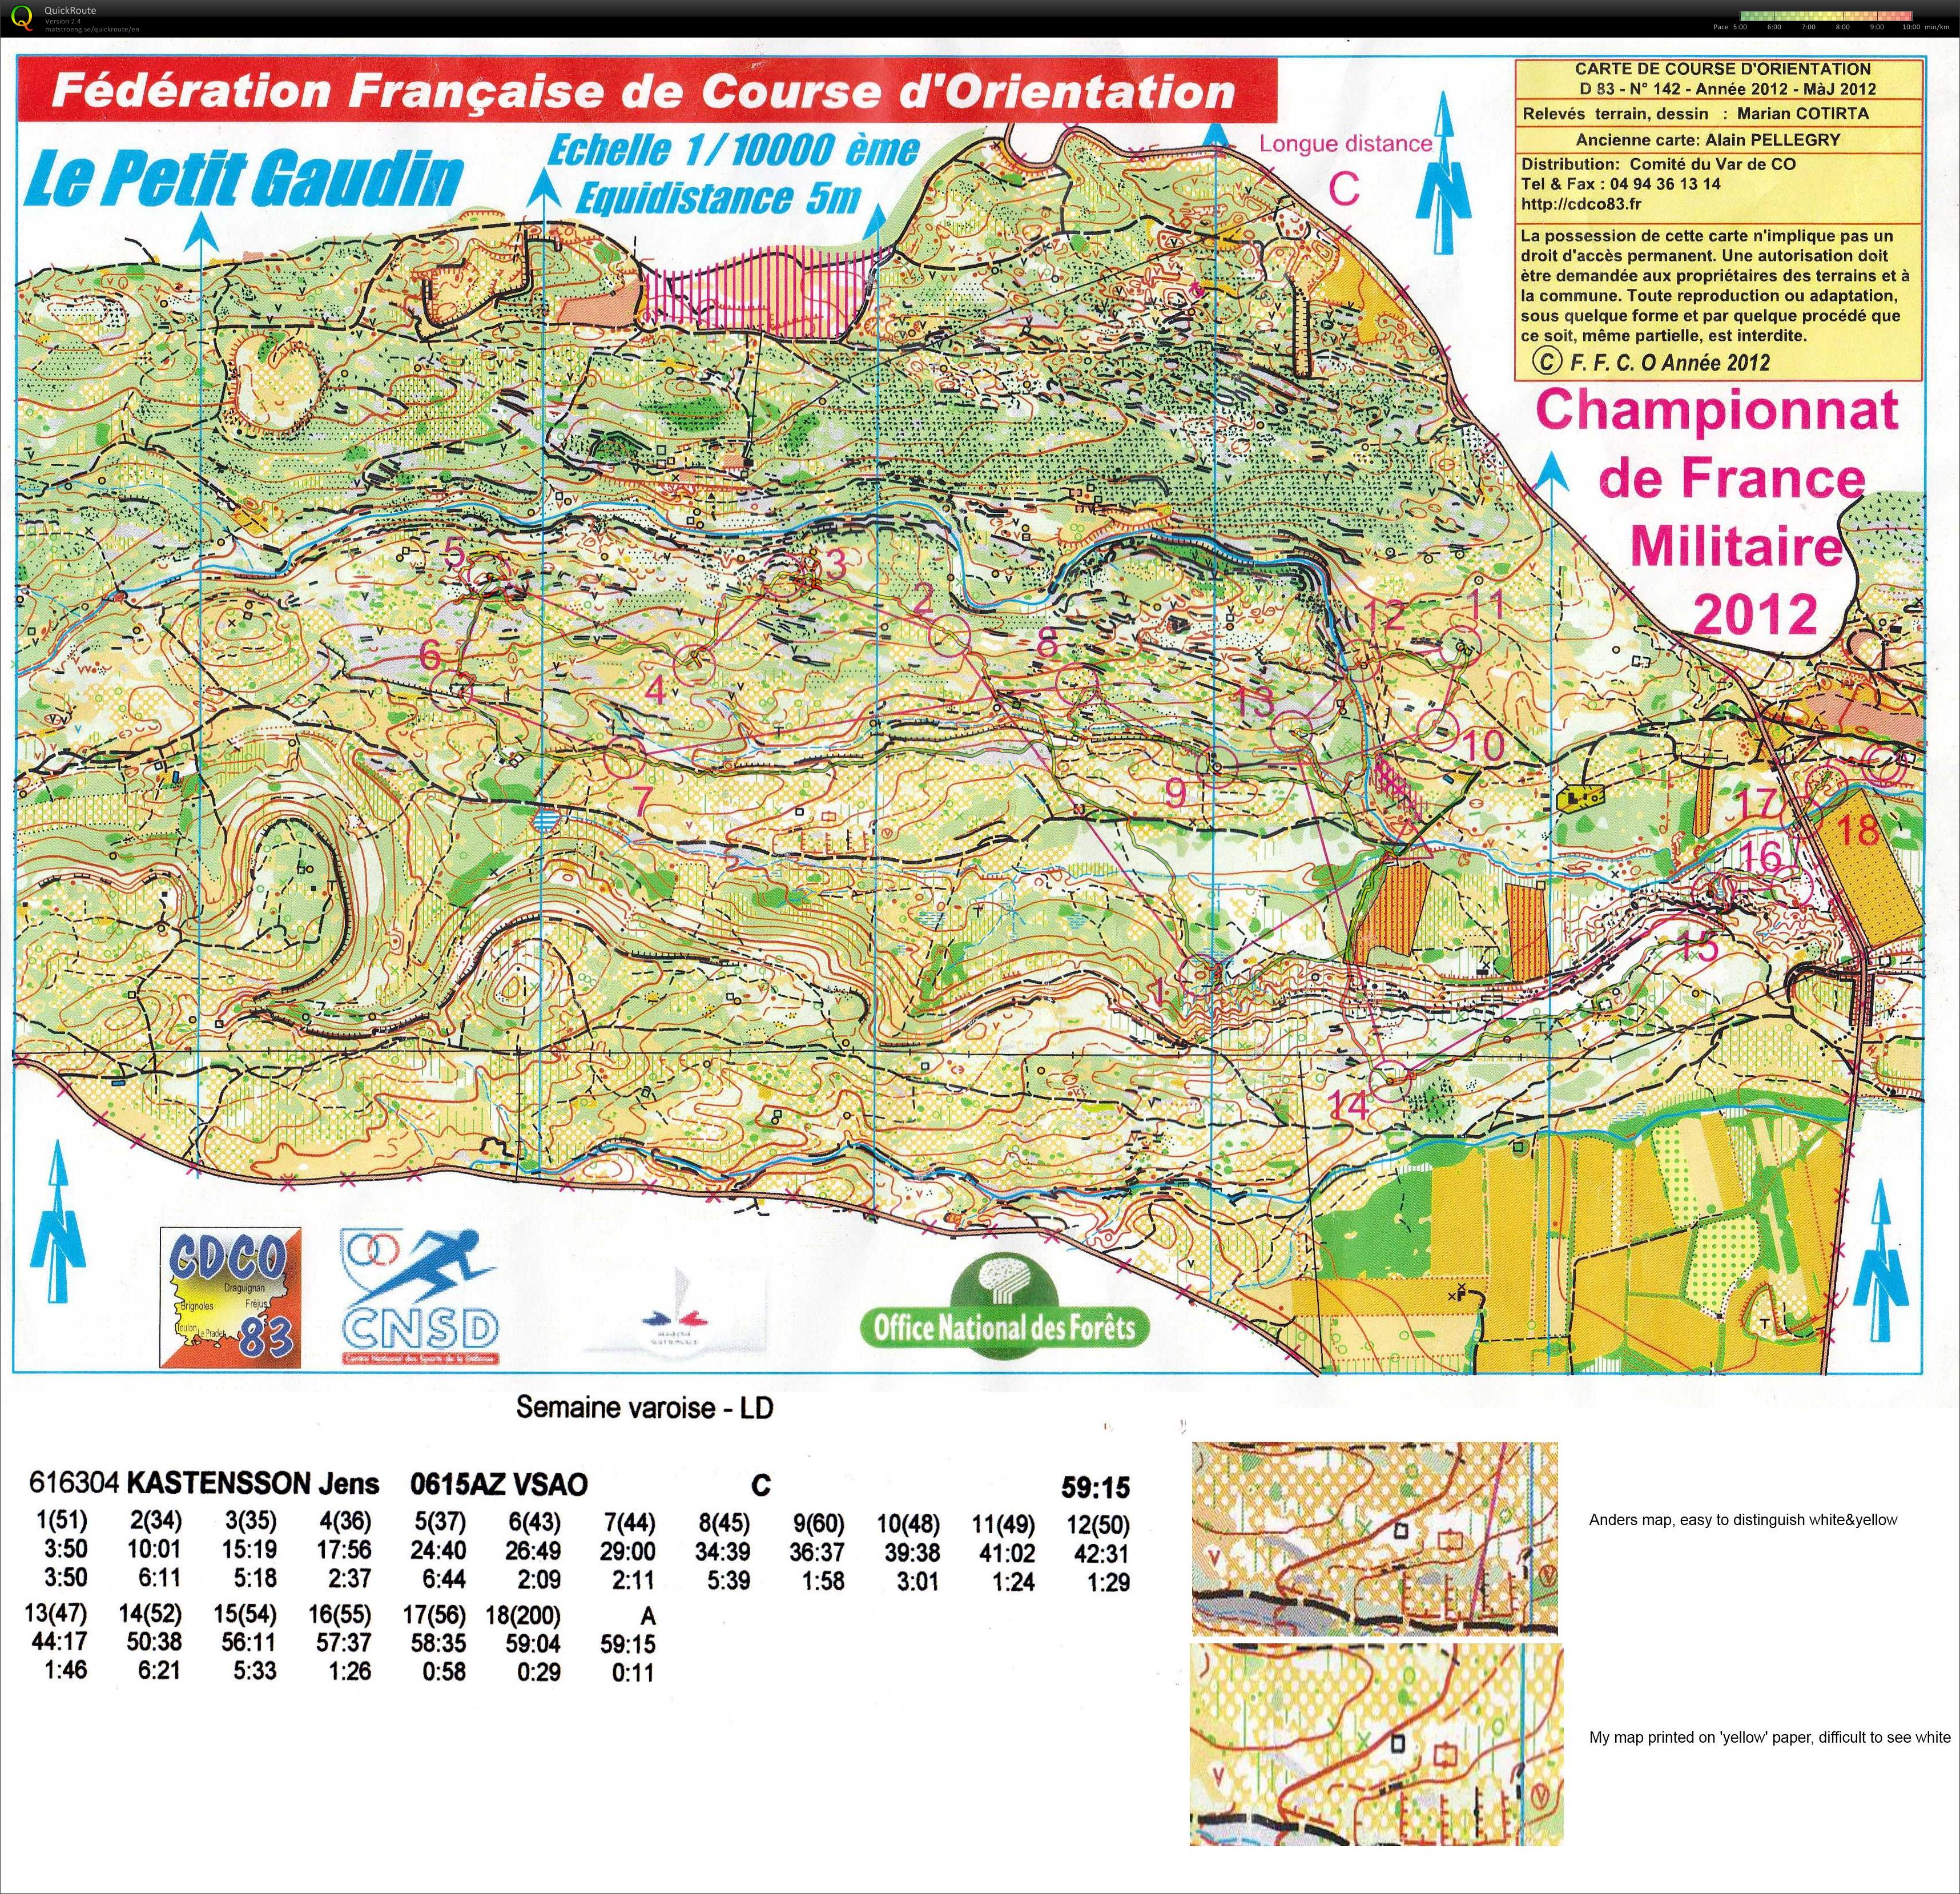 Open race after French Military long distance champs H50 (11/05/2012)